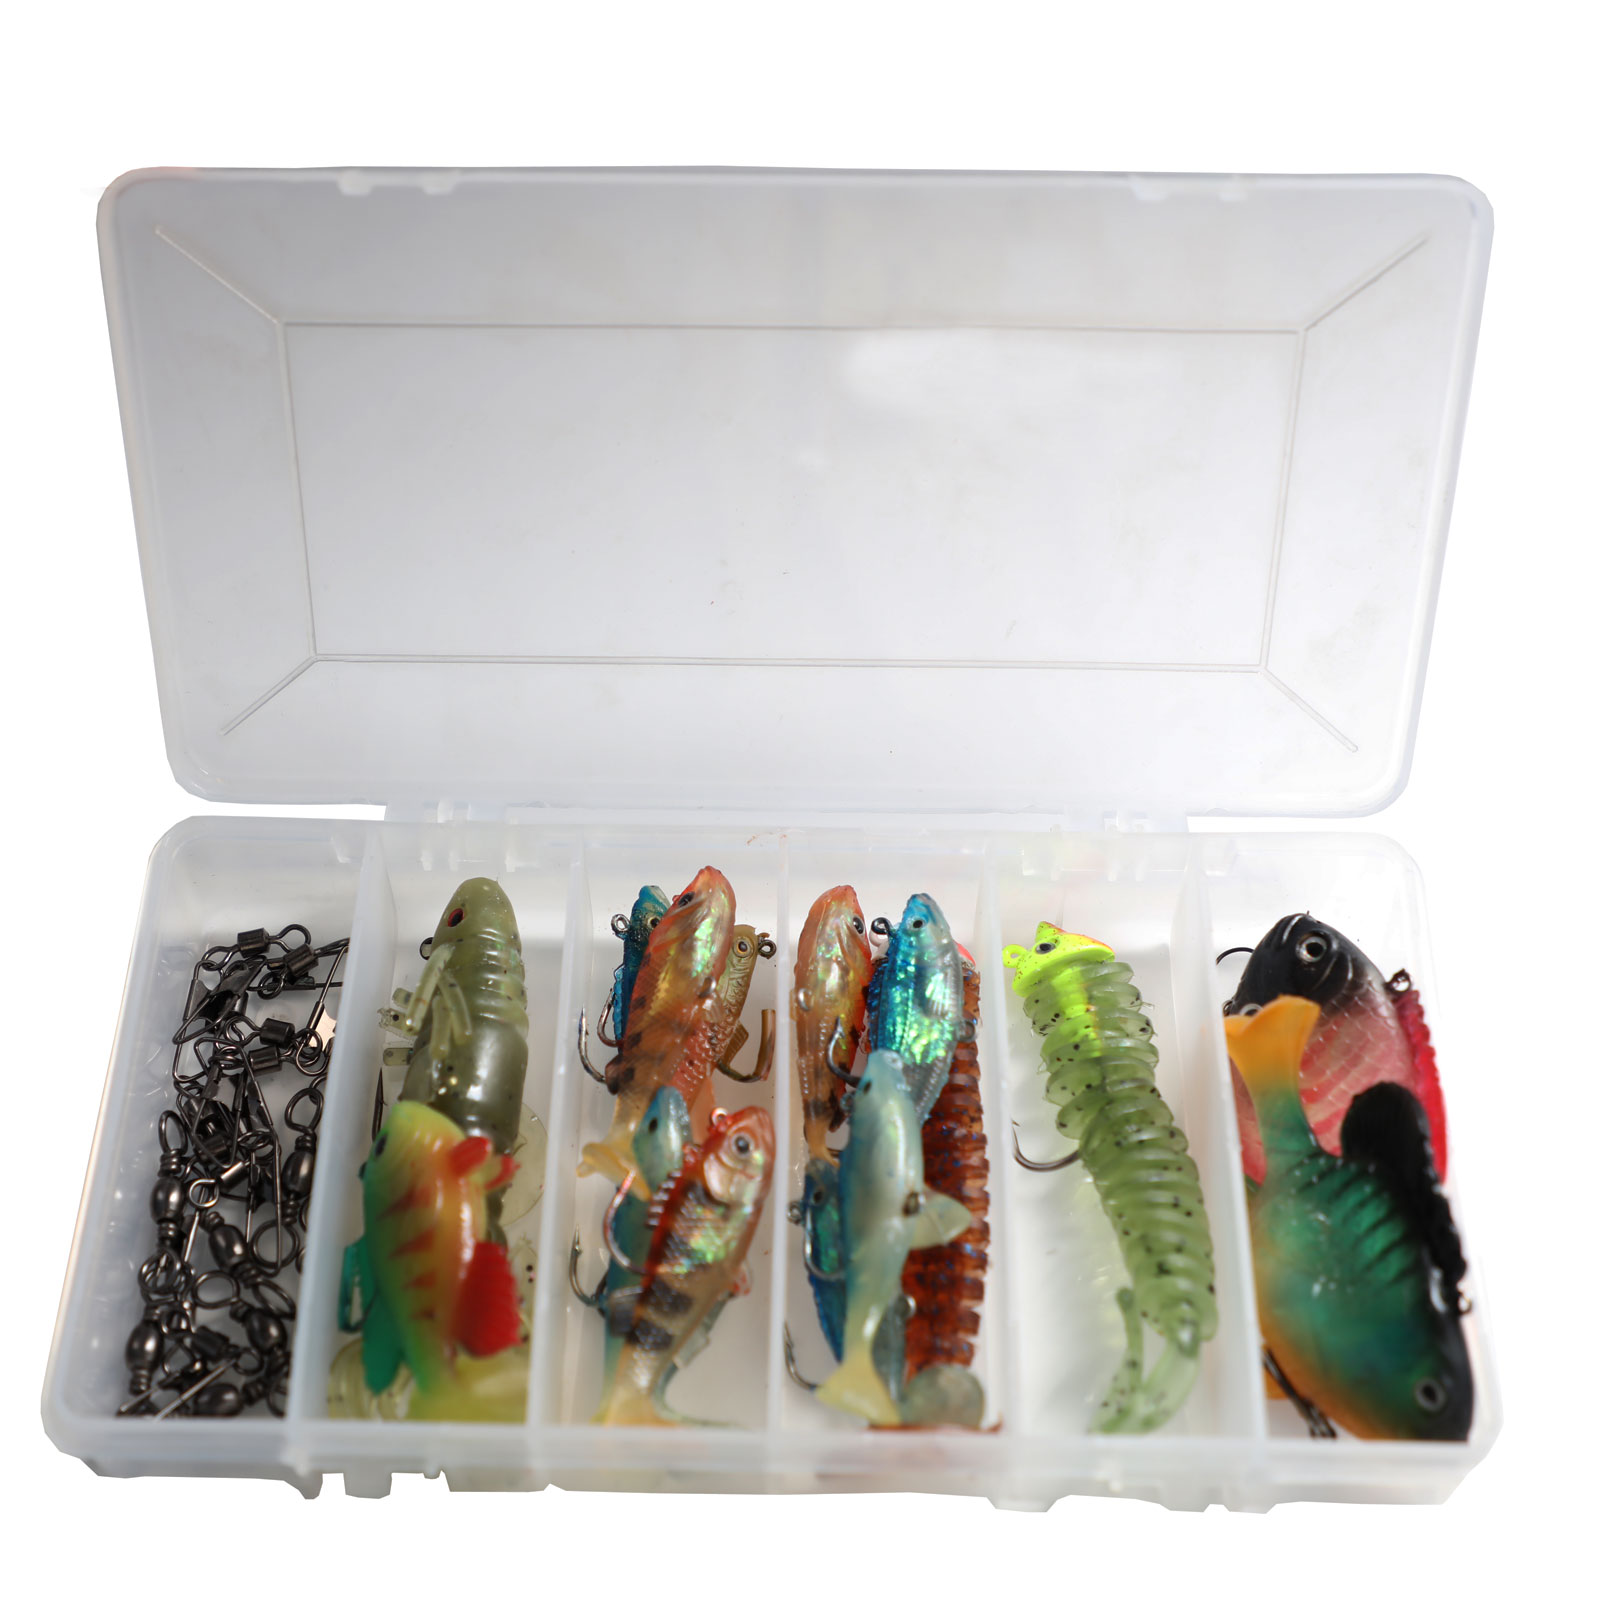 FREE FISHER Fishing Artificial Baits Set 36pcs with Clear Plastic Box Lead Fish Big Soft Wobbler Lures Stainless Steel Swivels for Carp Fishing